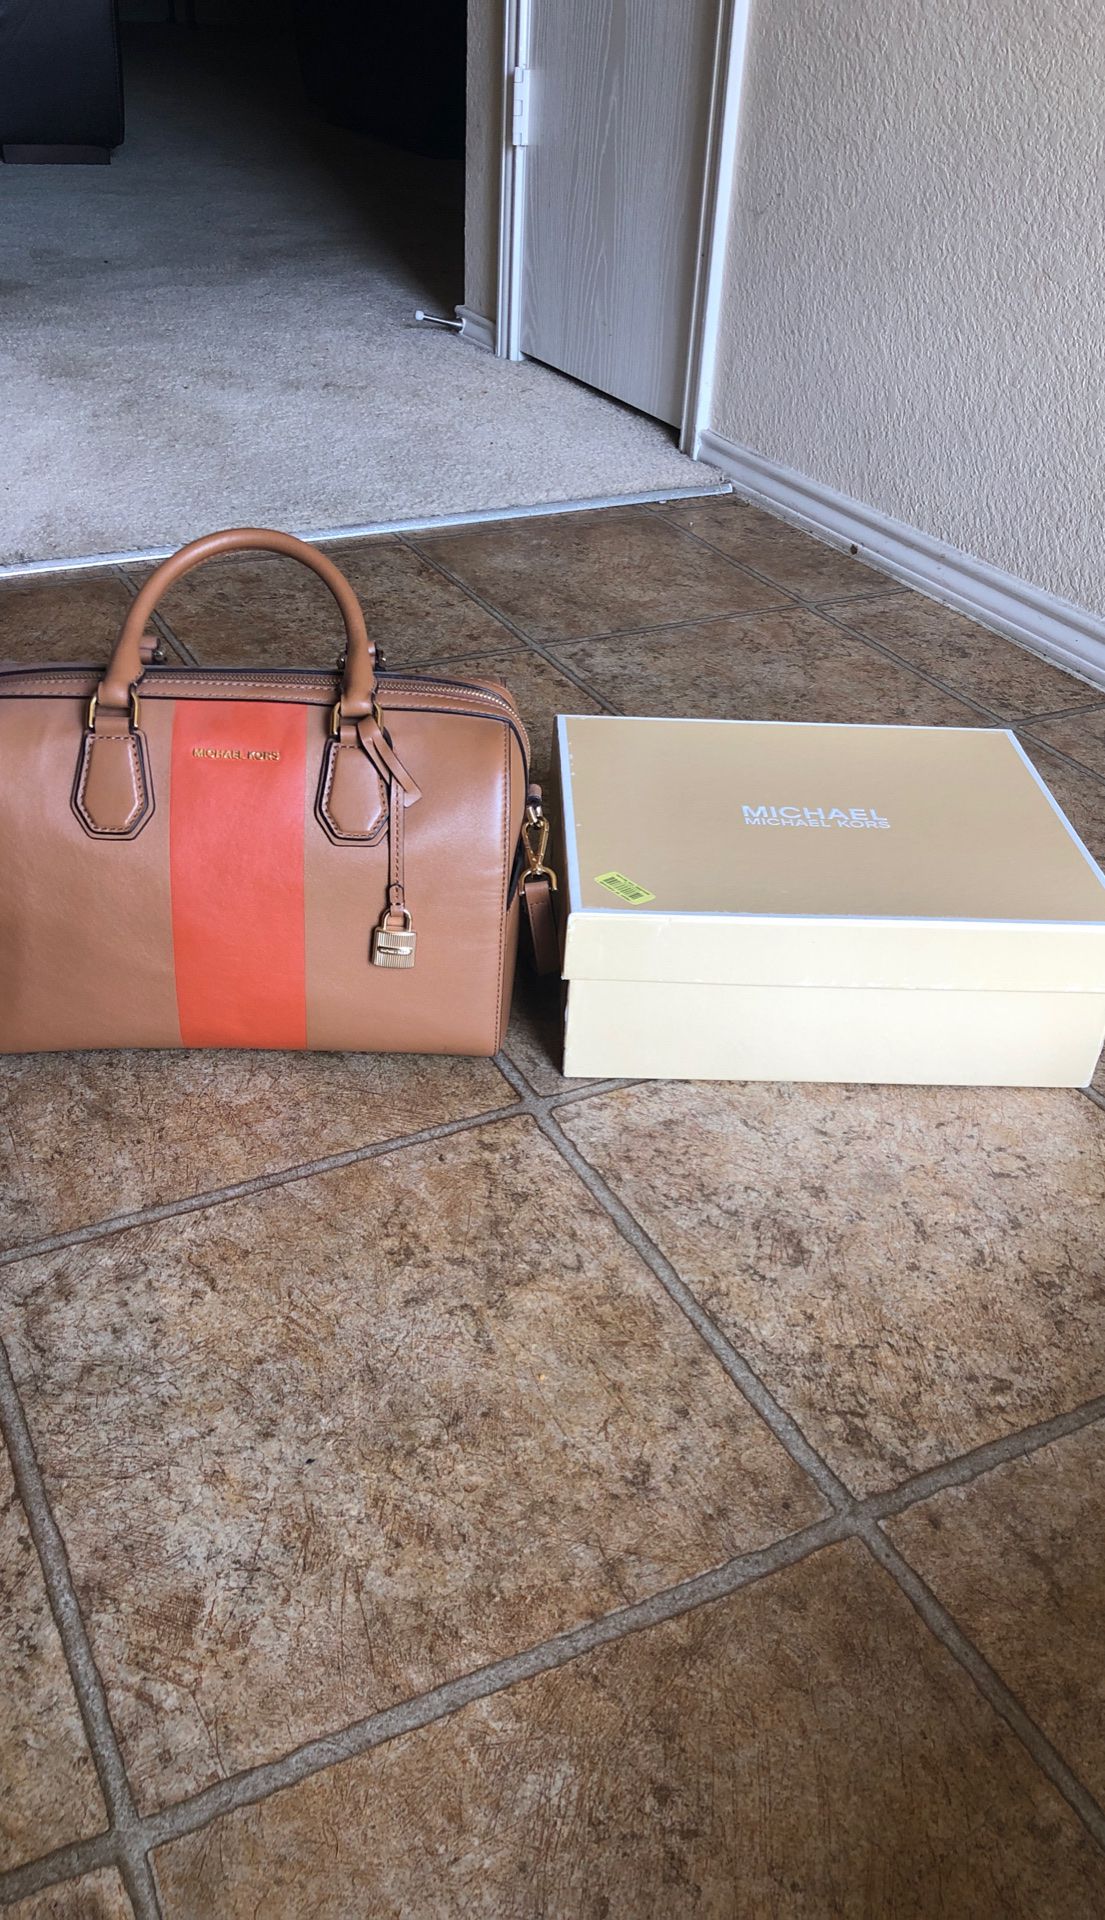 Michael kors bag and shoes the shoes are size 7 200 for both